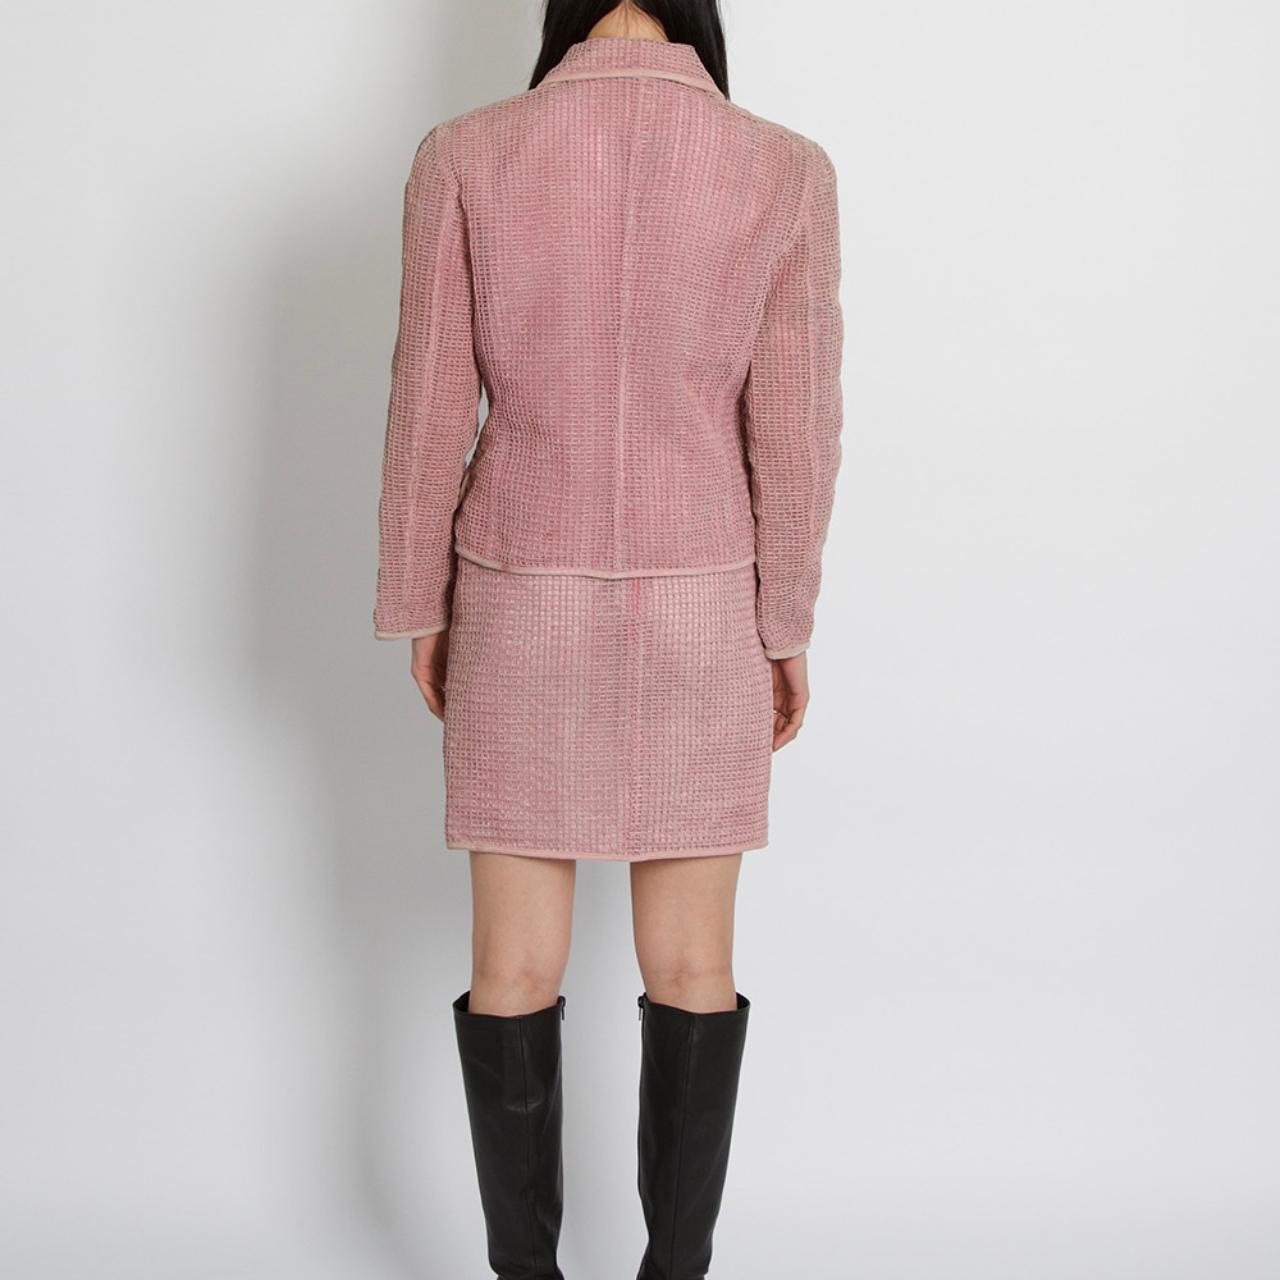 Gianni Versace Suit   Pink Jacket Skirt Set 1990's For Sale 1